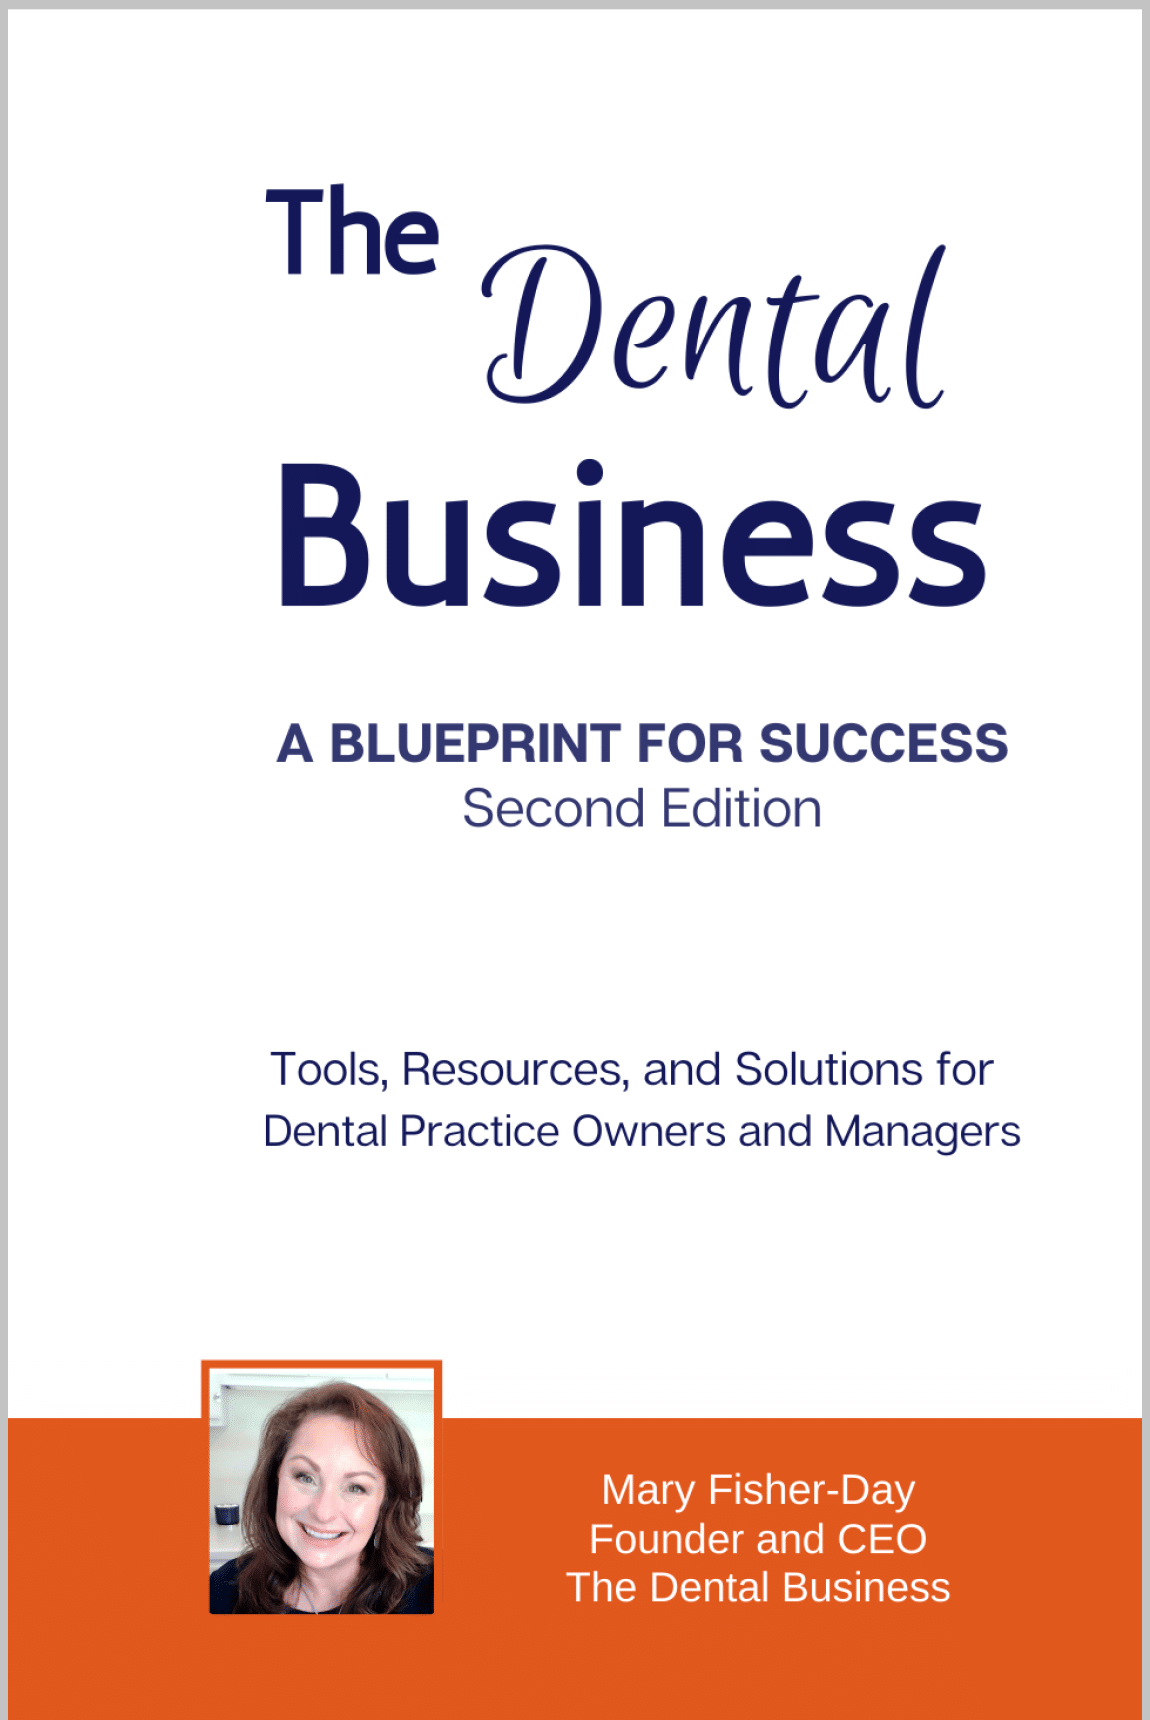 The Dental Business Book